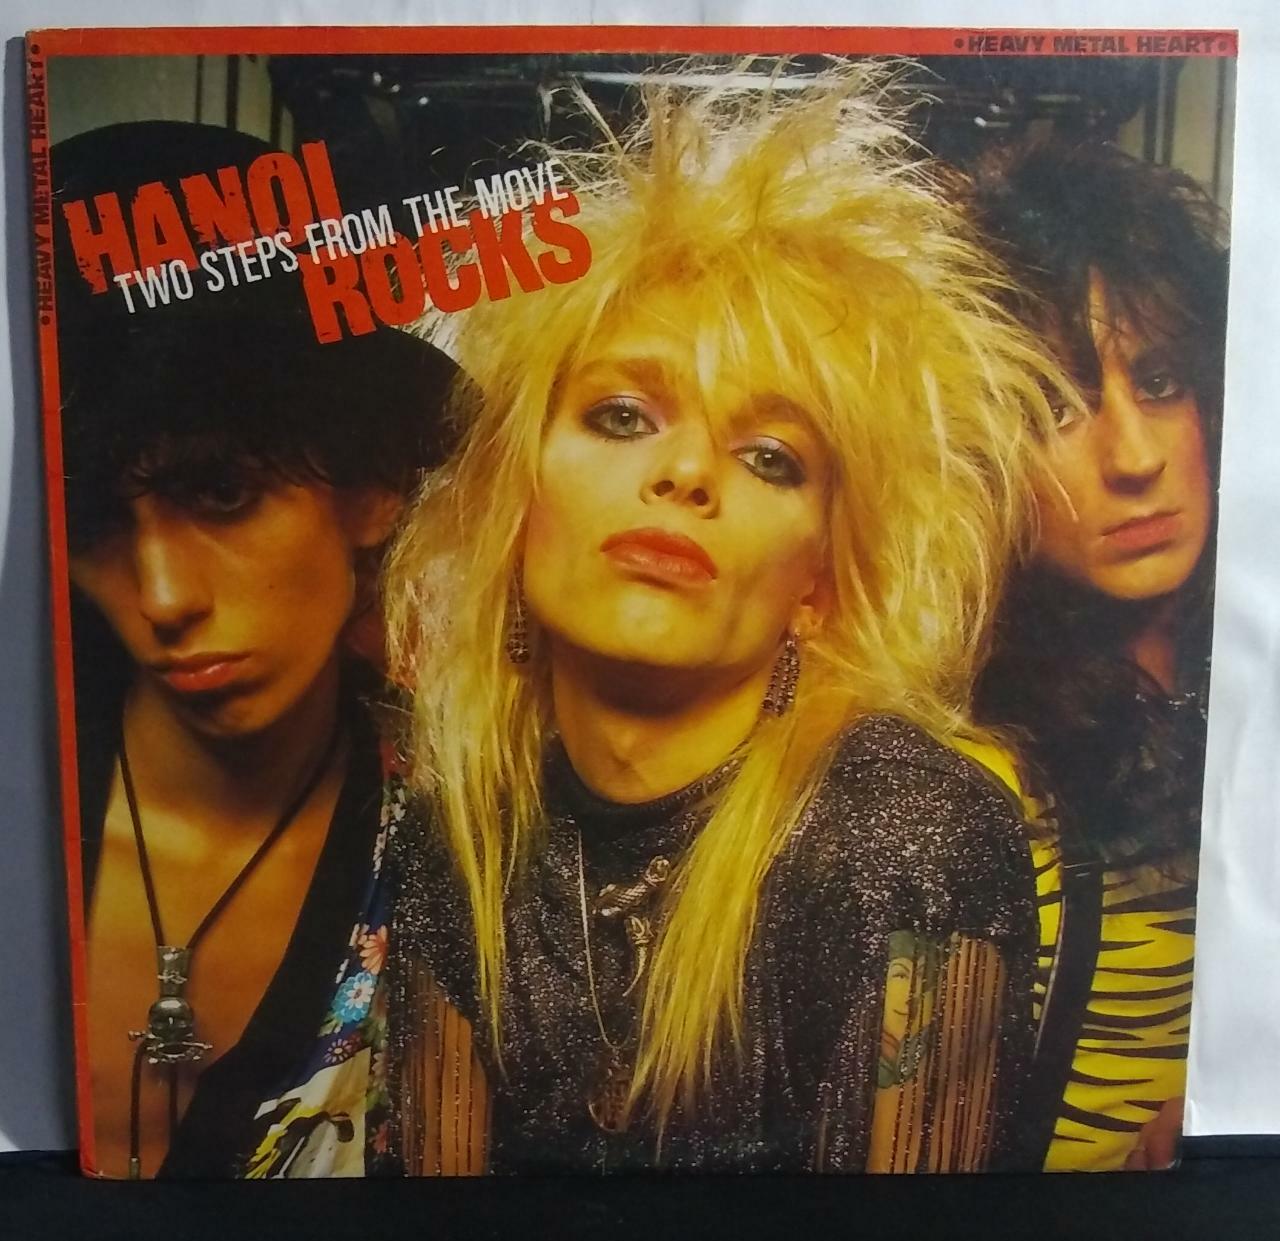 Vinil - Hanoi Rocks - Two Steps from the Move